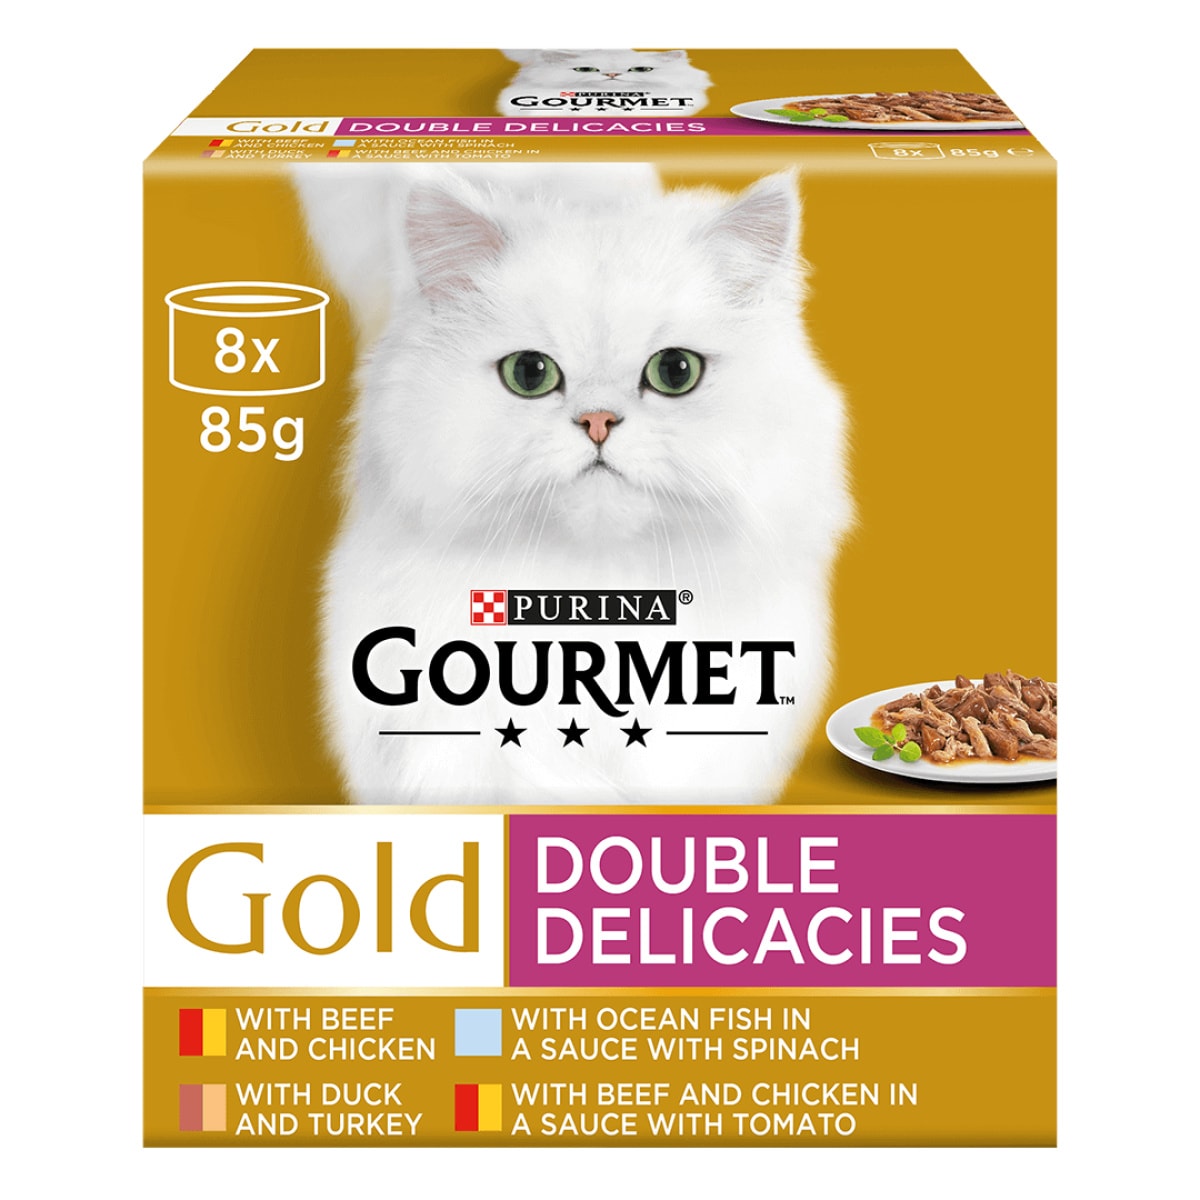 Gourmet Gold - Double Delicacies 8 x 85g Main Image